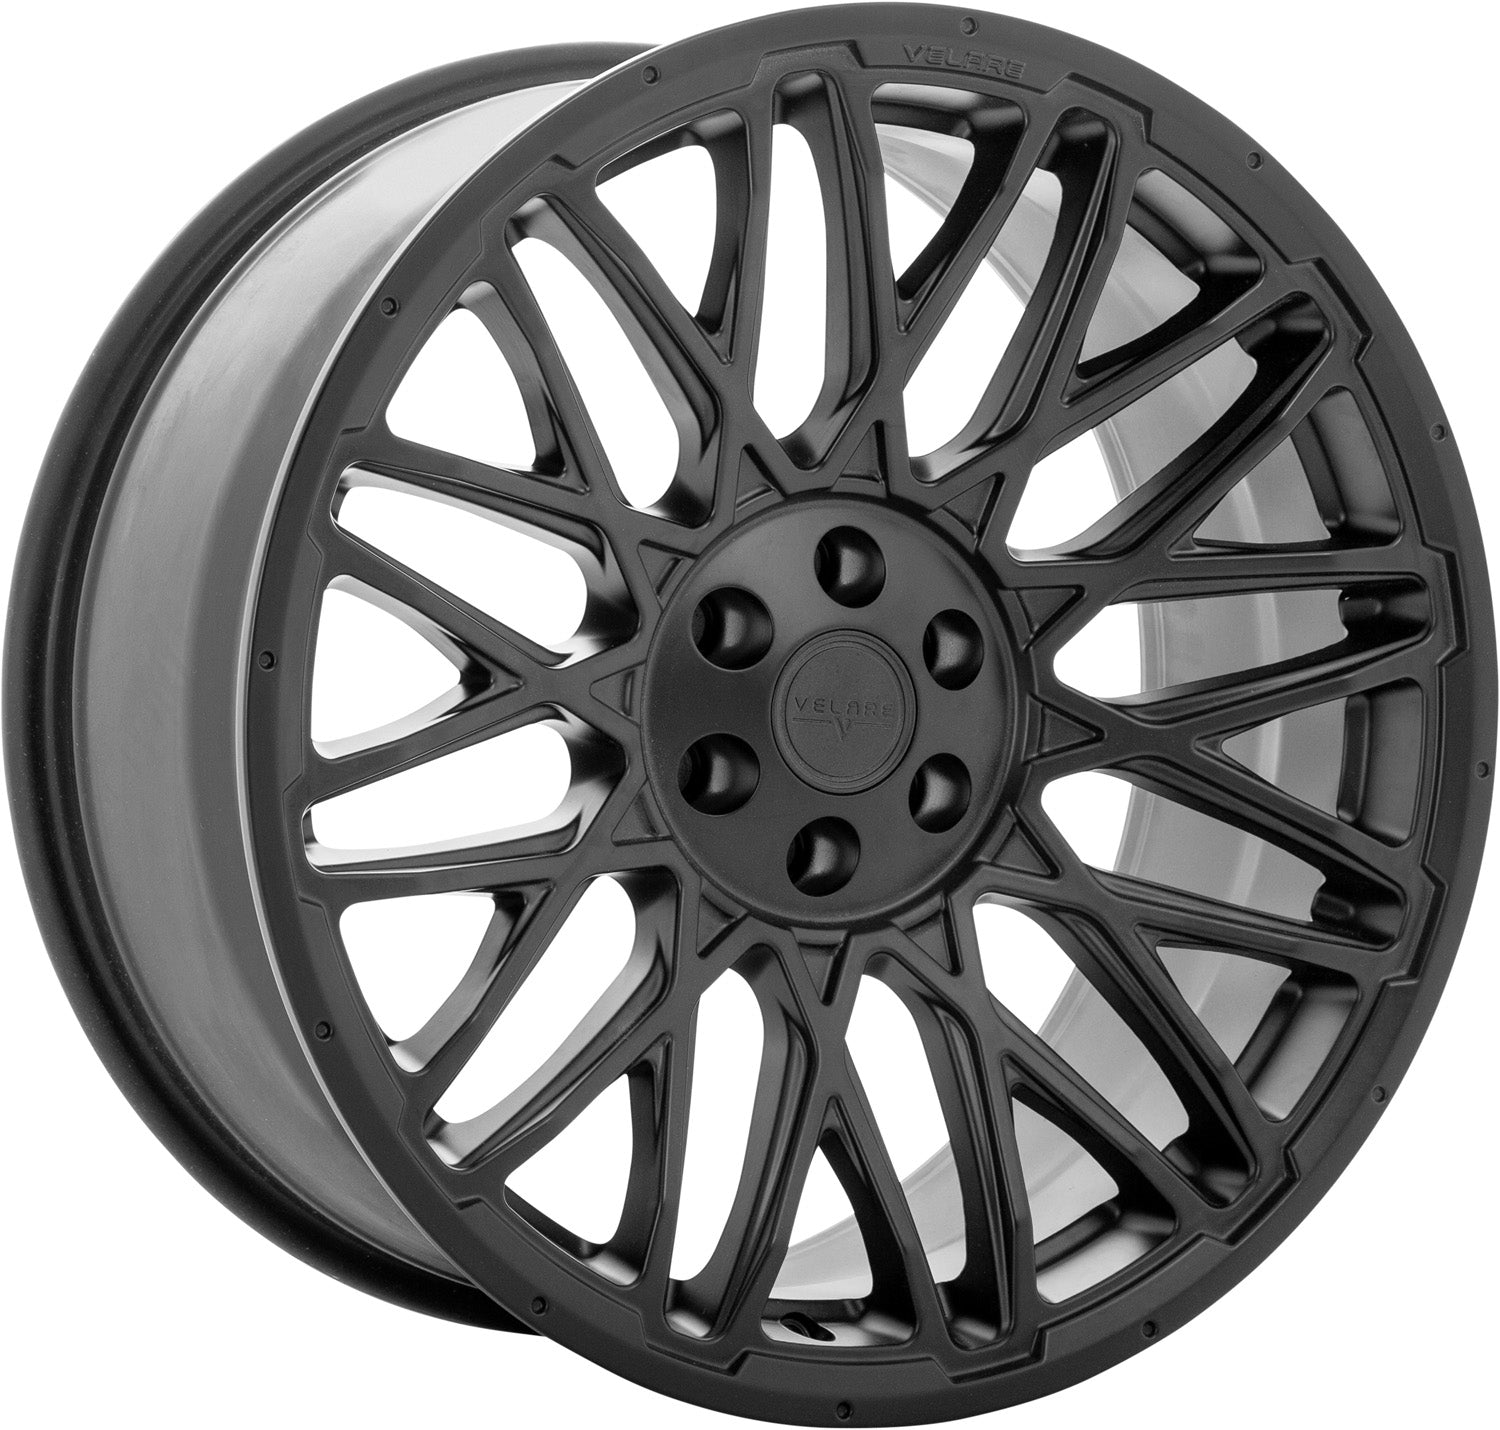 VLR-AT1 Wheel and Tyre Package - 4X4 Off Road